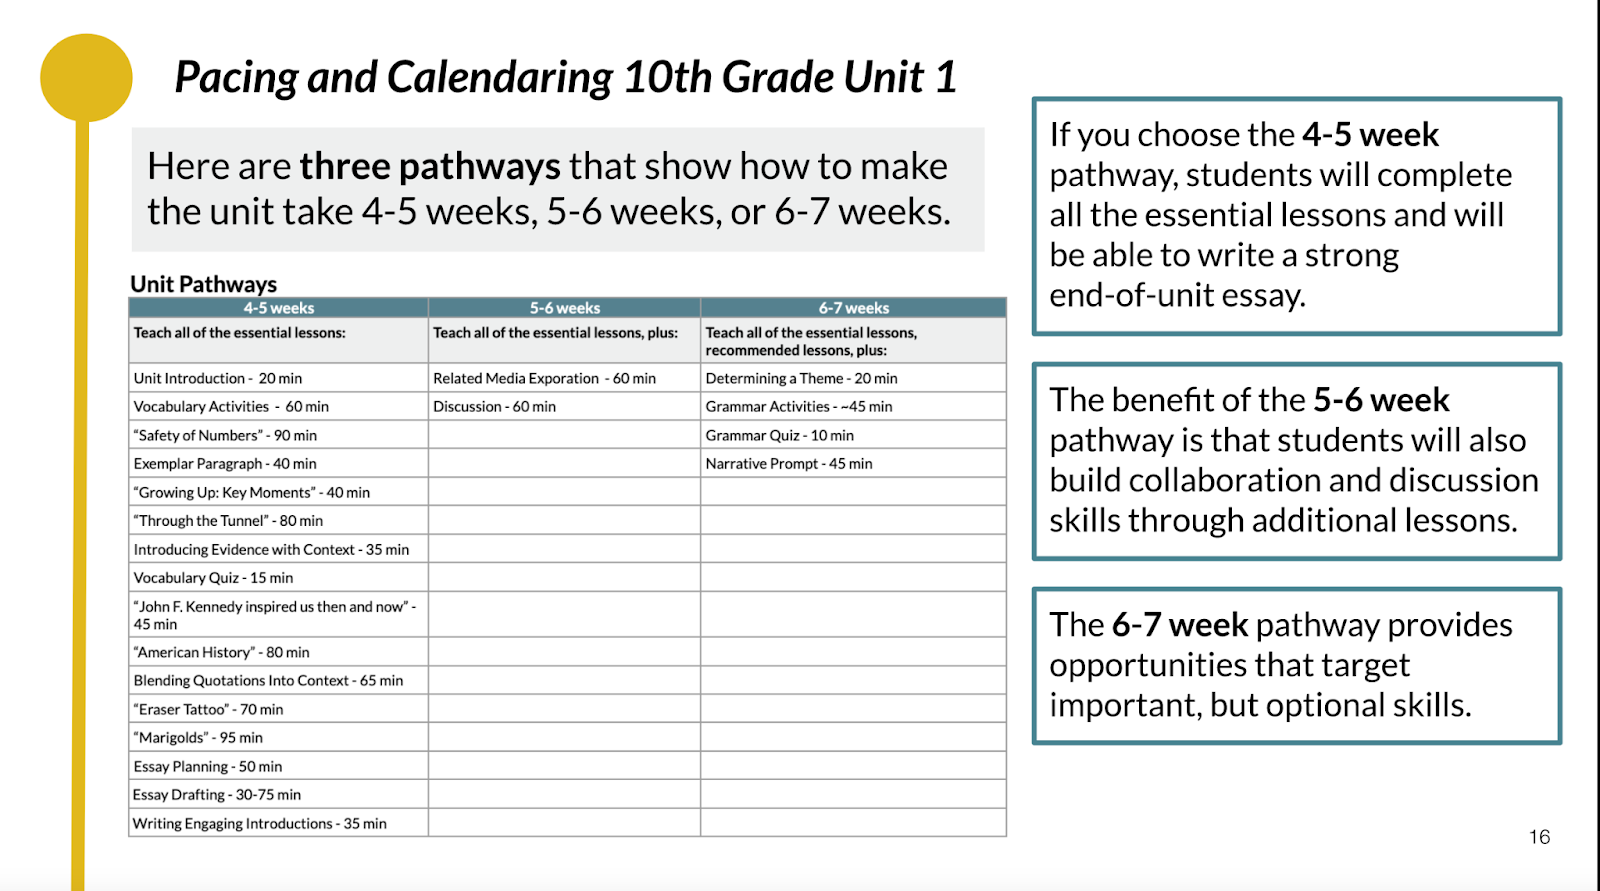 A slide from the video training for CommonLit 360 10th grade unit 1 with suggested pacing calendars for the unit.